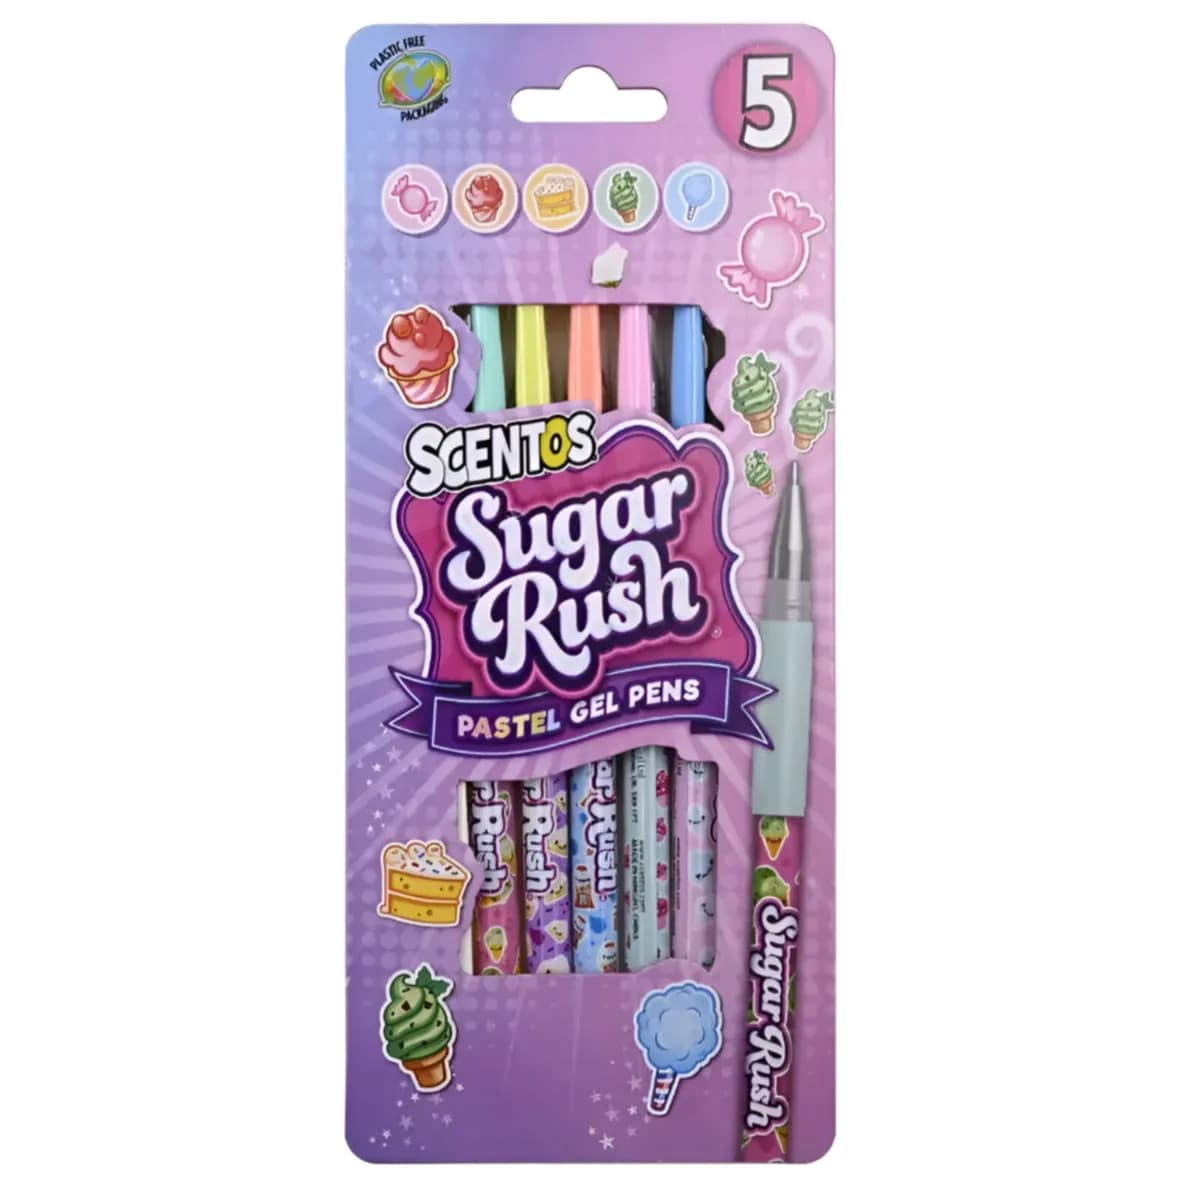 Scentos Sugar Rush Scented Pastel Gel Pens - Pack of 5 -(PNFS60)